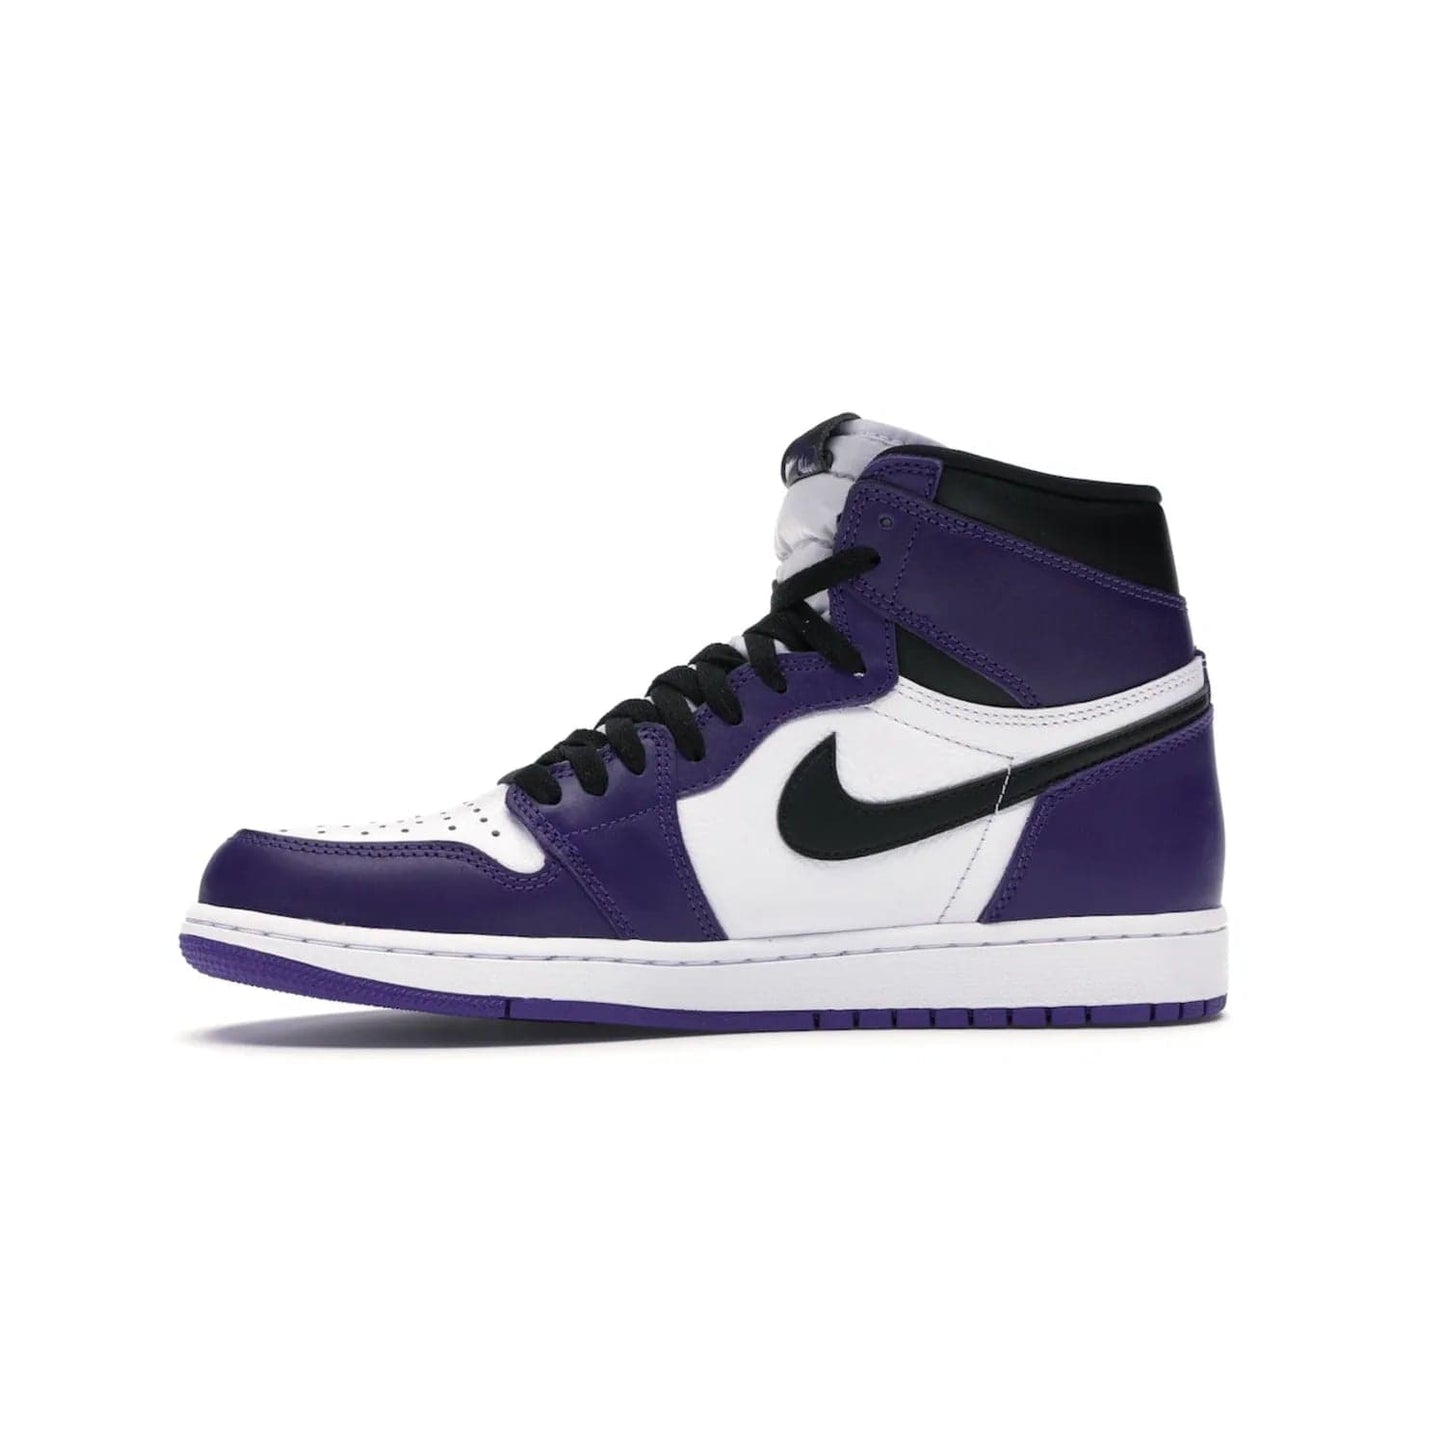 Jordan 1 Retro High Court Purple White - Image 18 - Only at www.BallersClubKickz.com - Grab the classic Jordan 1 Retro High Court Purple White and add major flavor to your collection. White leather upper with Court Purple overlays and Swoosh logo. White midsole and purple outsole. Get yours and rep your Jordan Brand.